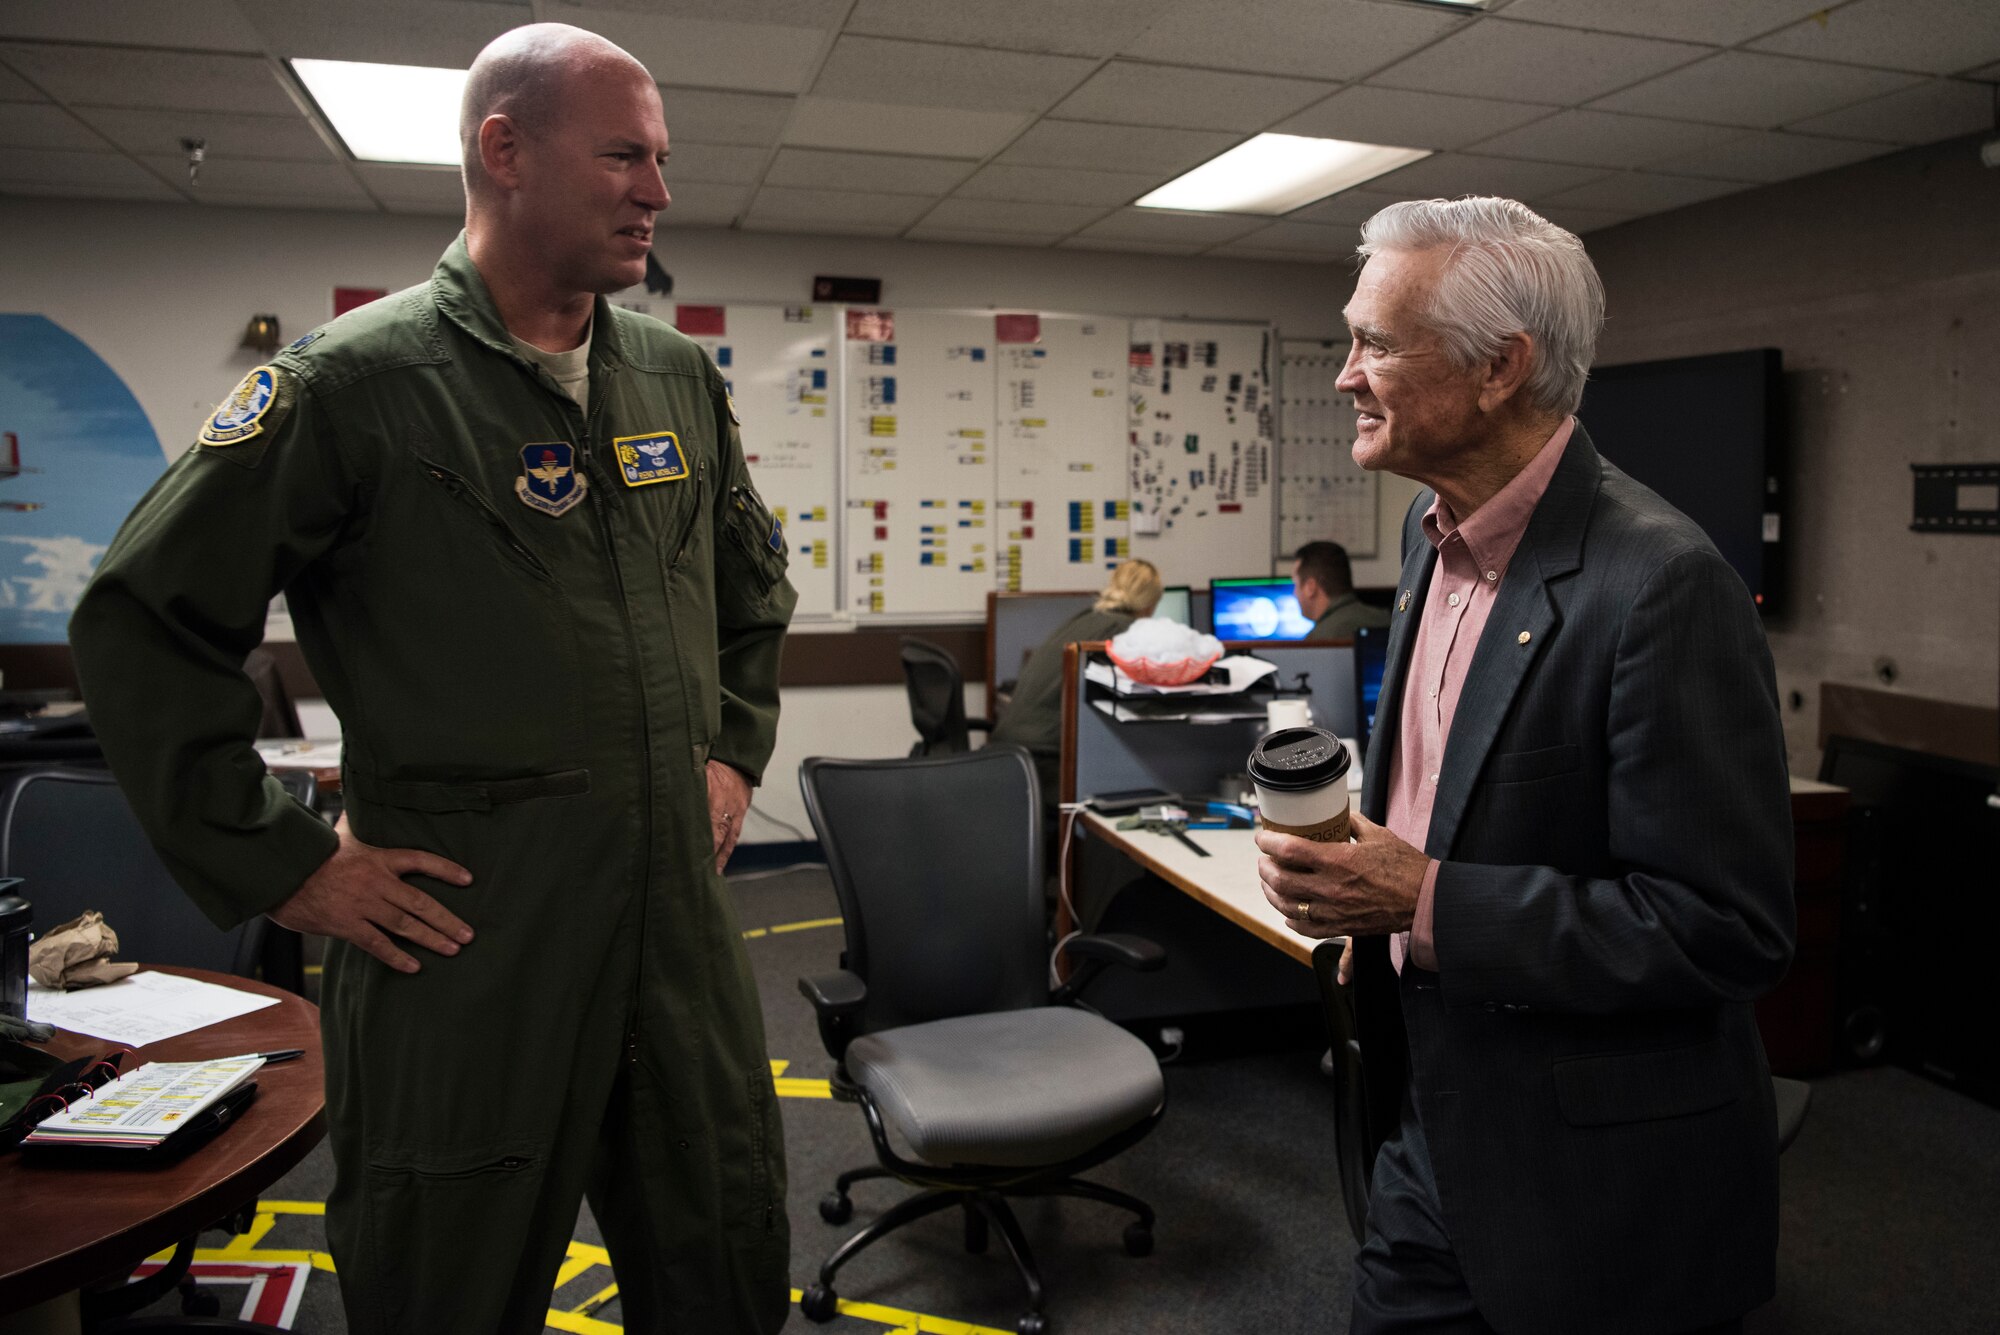 Lt. Col. Gentry Mobley, 85th Flying Training Squadron commander, speaks to retired Lt. Col. Barry Bridger, former Prisoner of War, at Laughlin Air Force Base, Texas, Oct. 23, 2019. Mobley gave Bridger a tour of the innovative technology student pilots get to interact with. (U.S. Air Force photo by Senior Airman Marco A. Gomez)